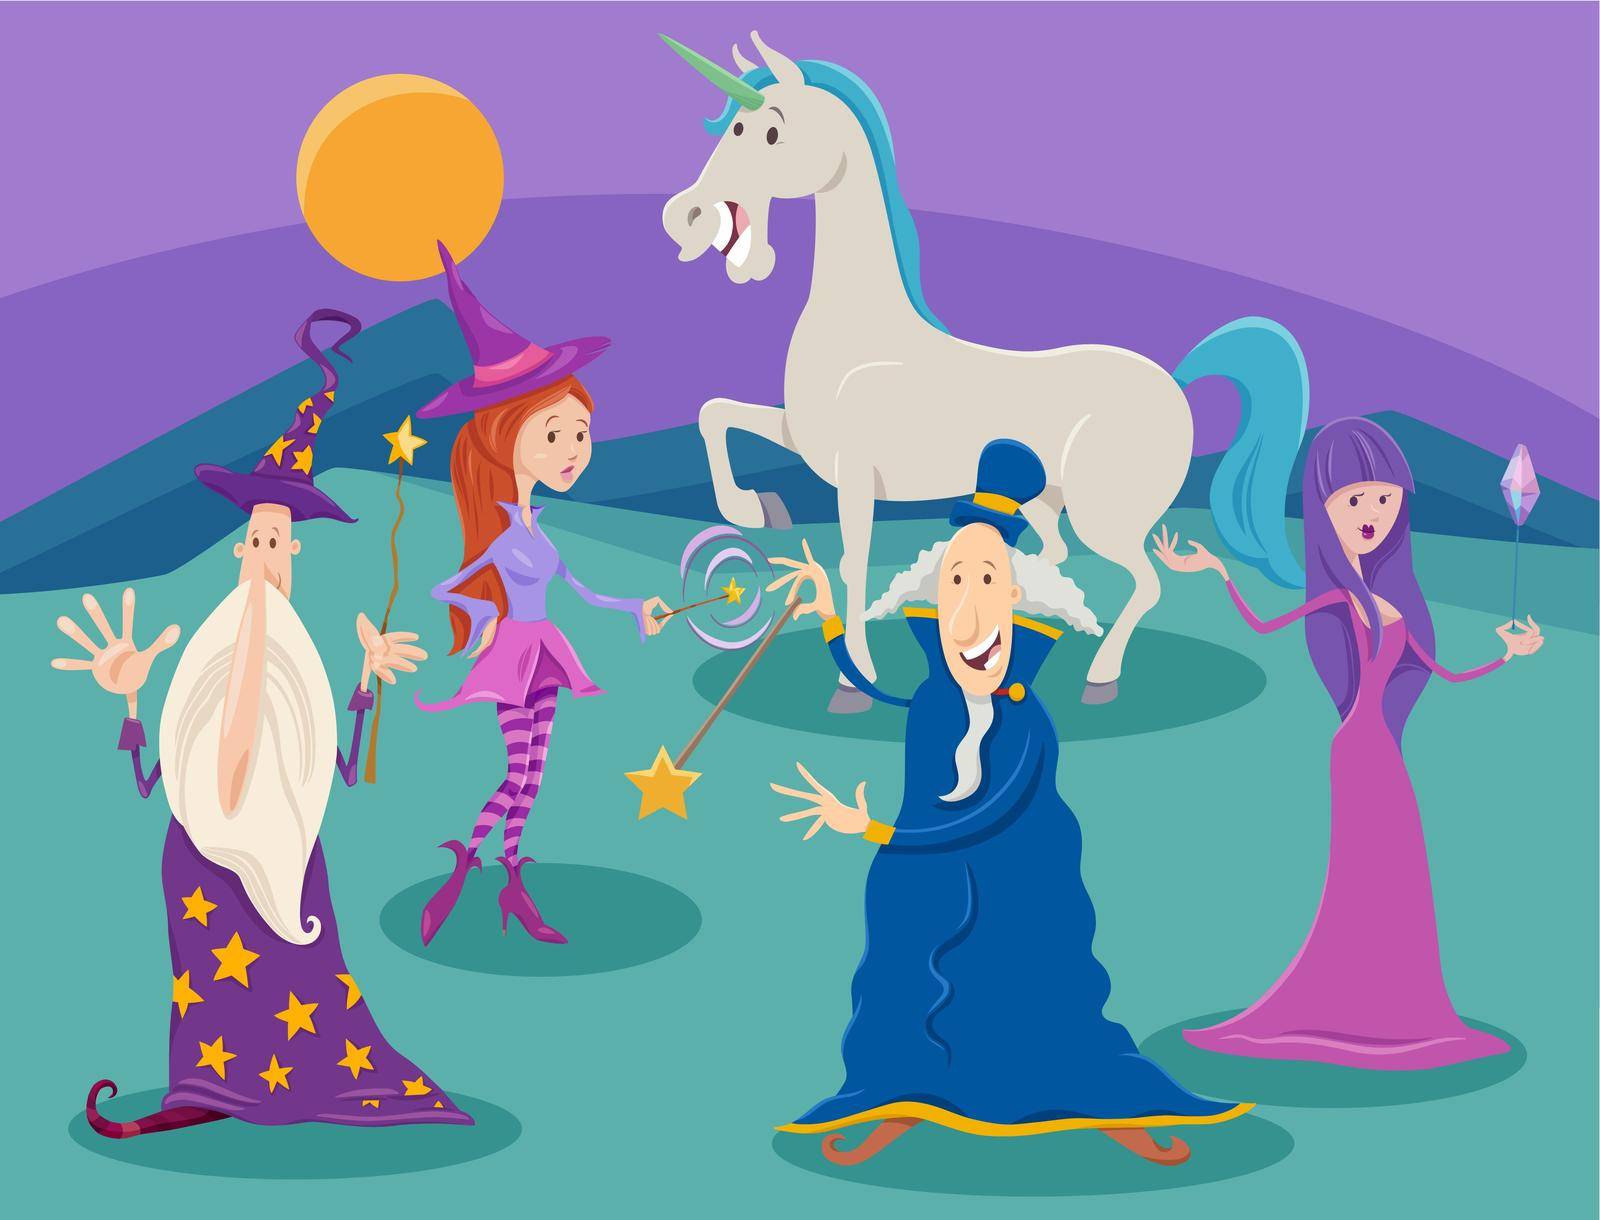 Cartoon illustrations of wizards and witches with unicorn fantasy characters group